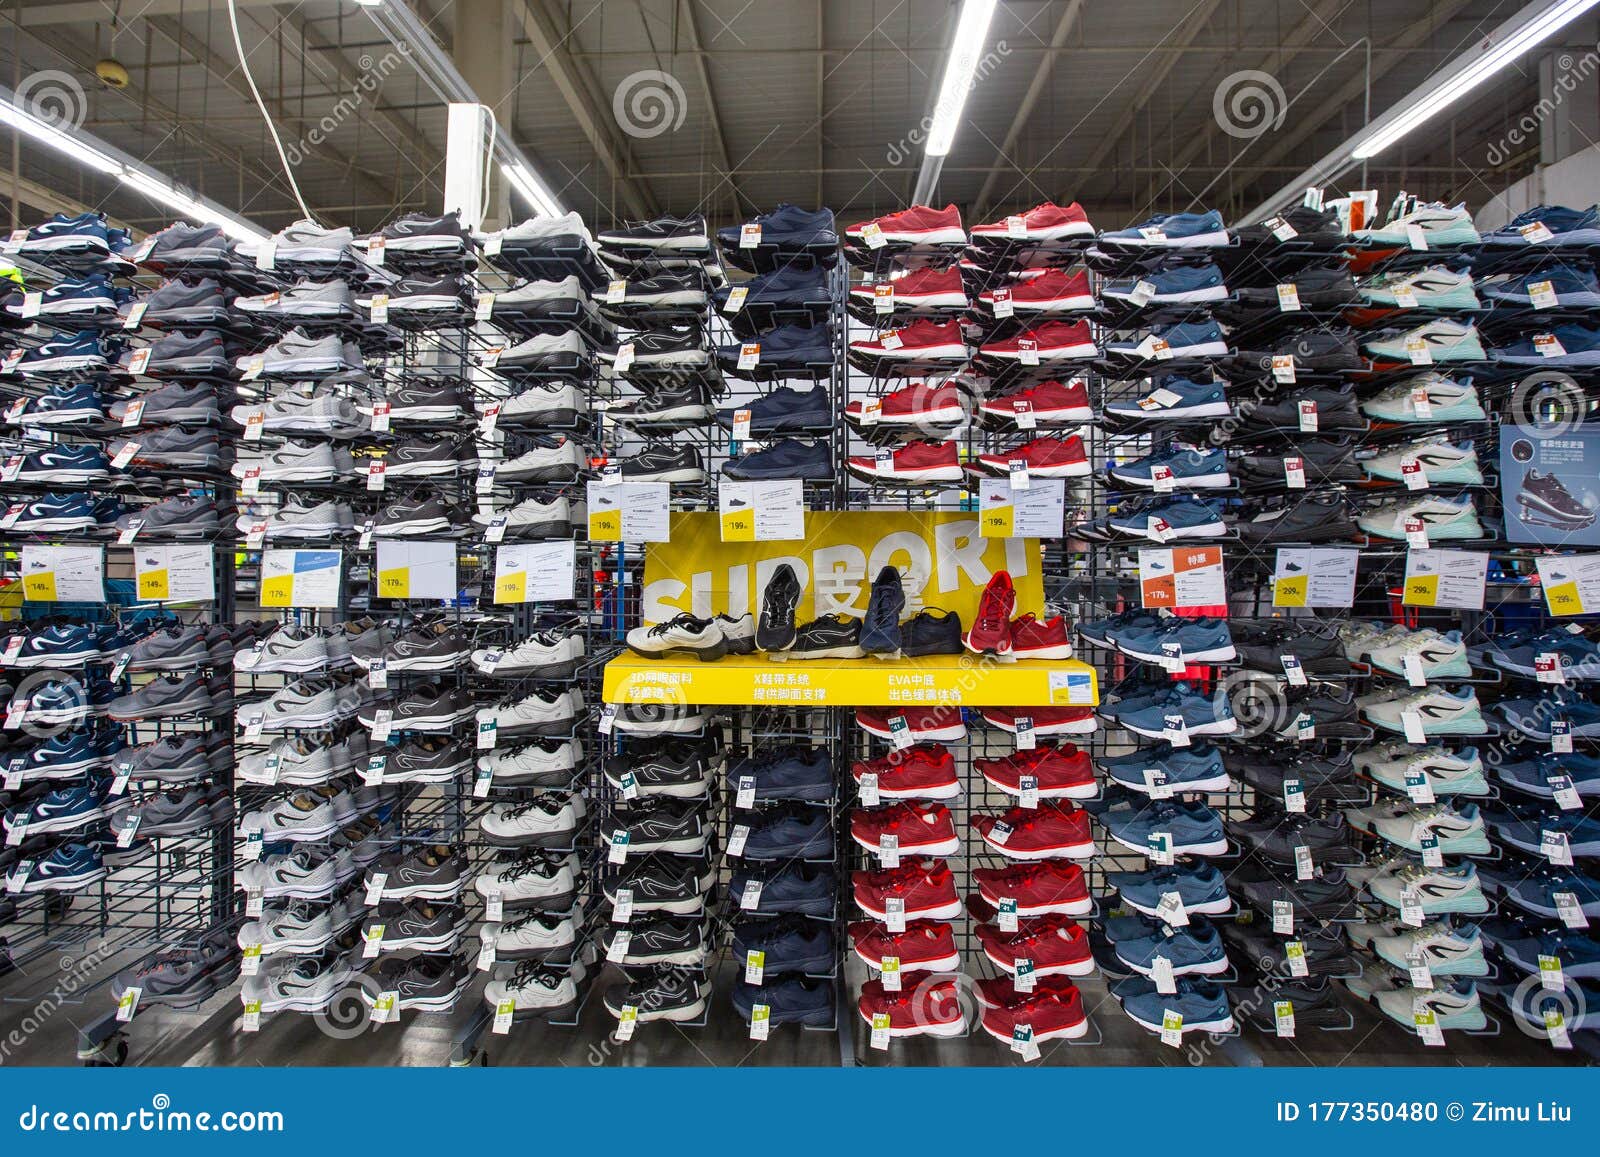 A Shelf of Running Shoes in a Supermarket Editorial Image - Image of ...